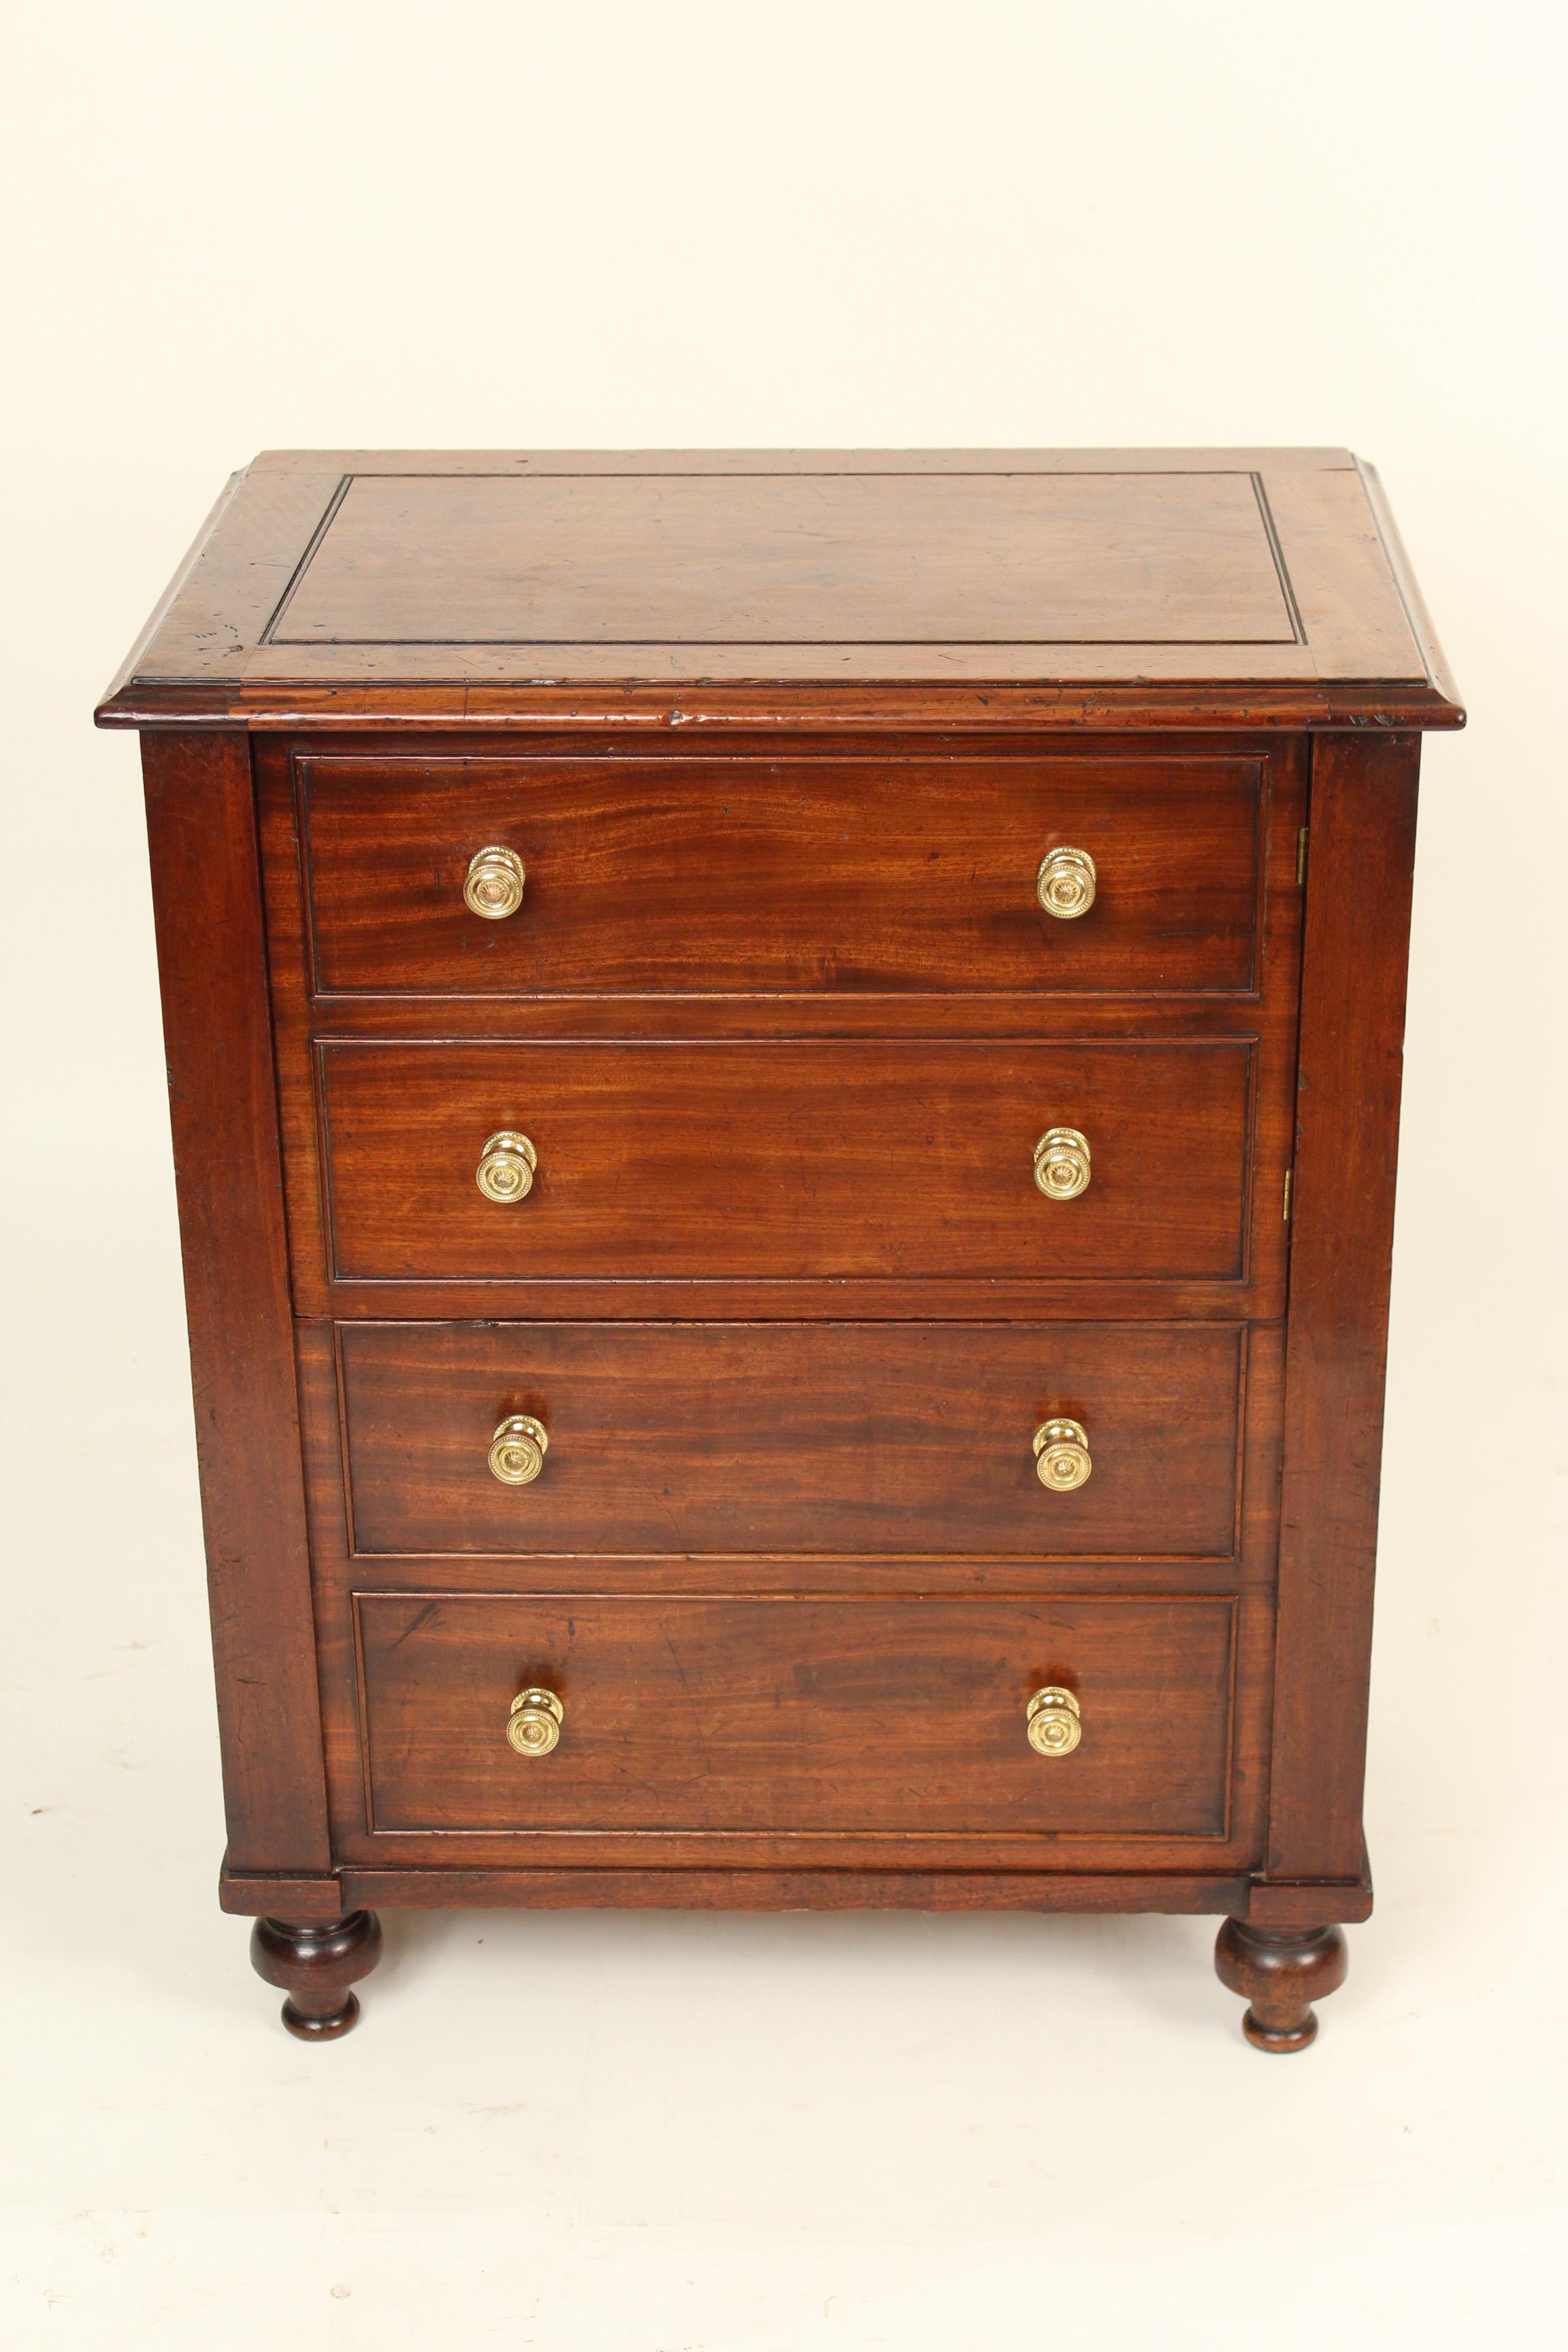 William IV mahogany occasional cabinet, circa 1830. The top two drawers are actually a door which opens and closes. The bottom two drawers are closed and does not open or close, this area can be used for storage. This cabinet would be an excellent